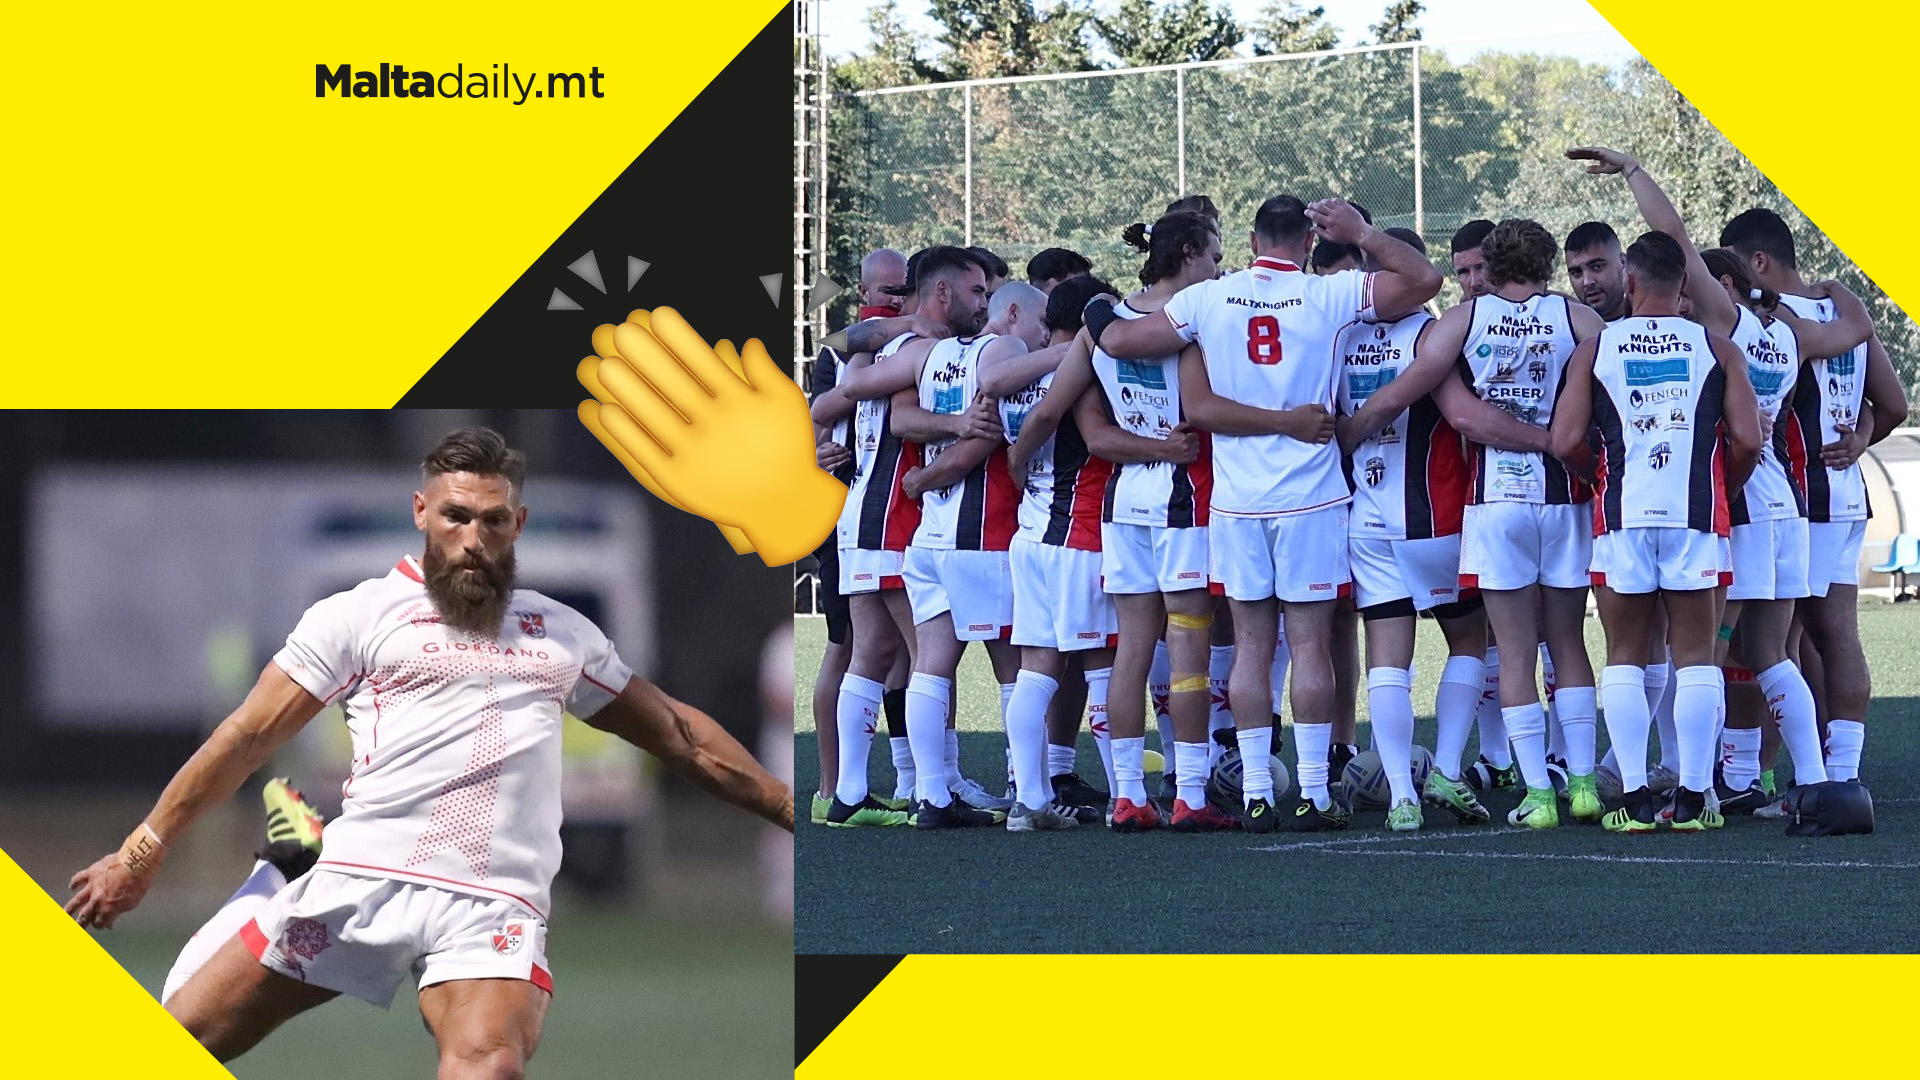 Malta's national rugby team makes it into World Top 10 as meteoric rise continues